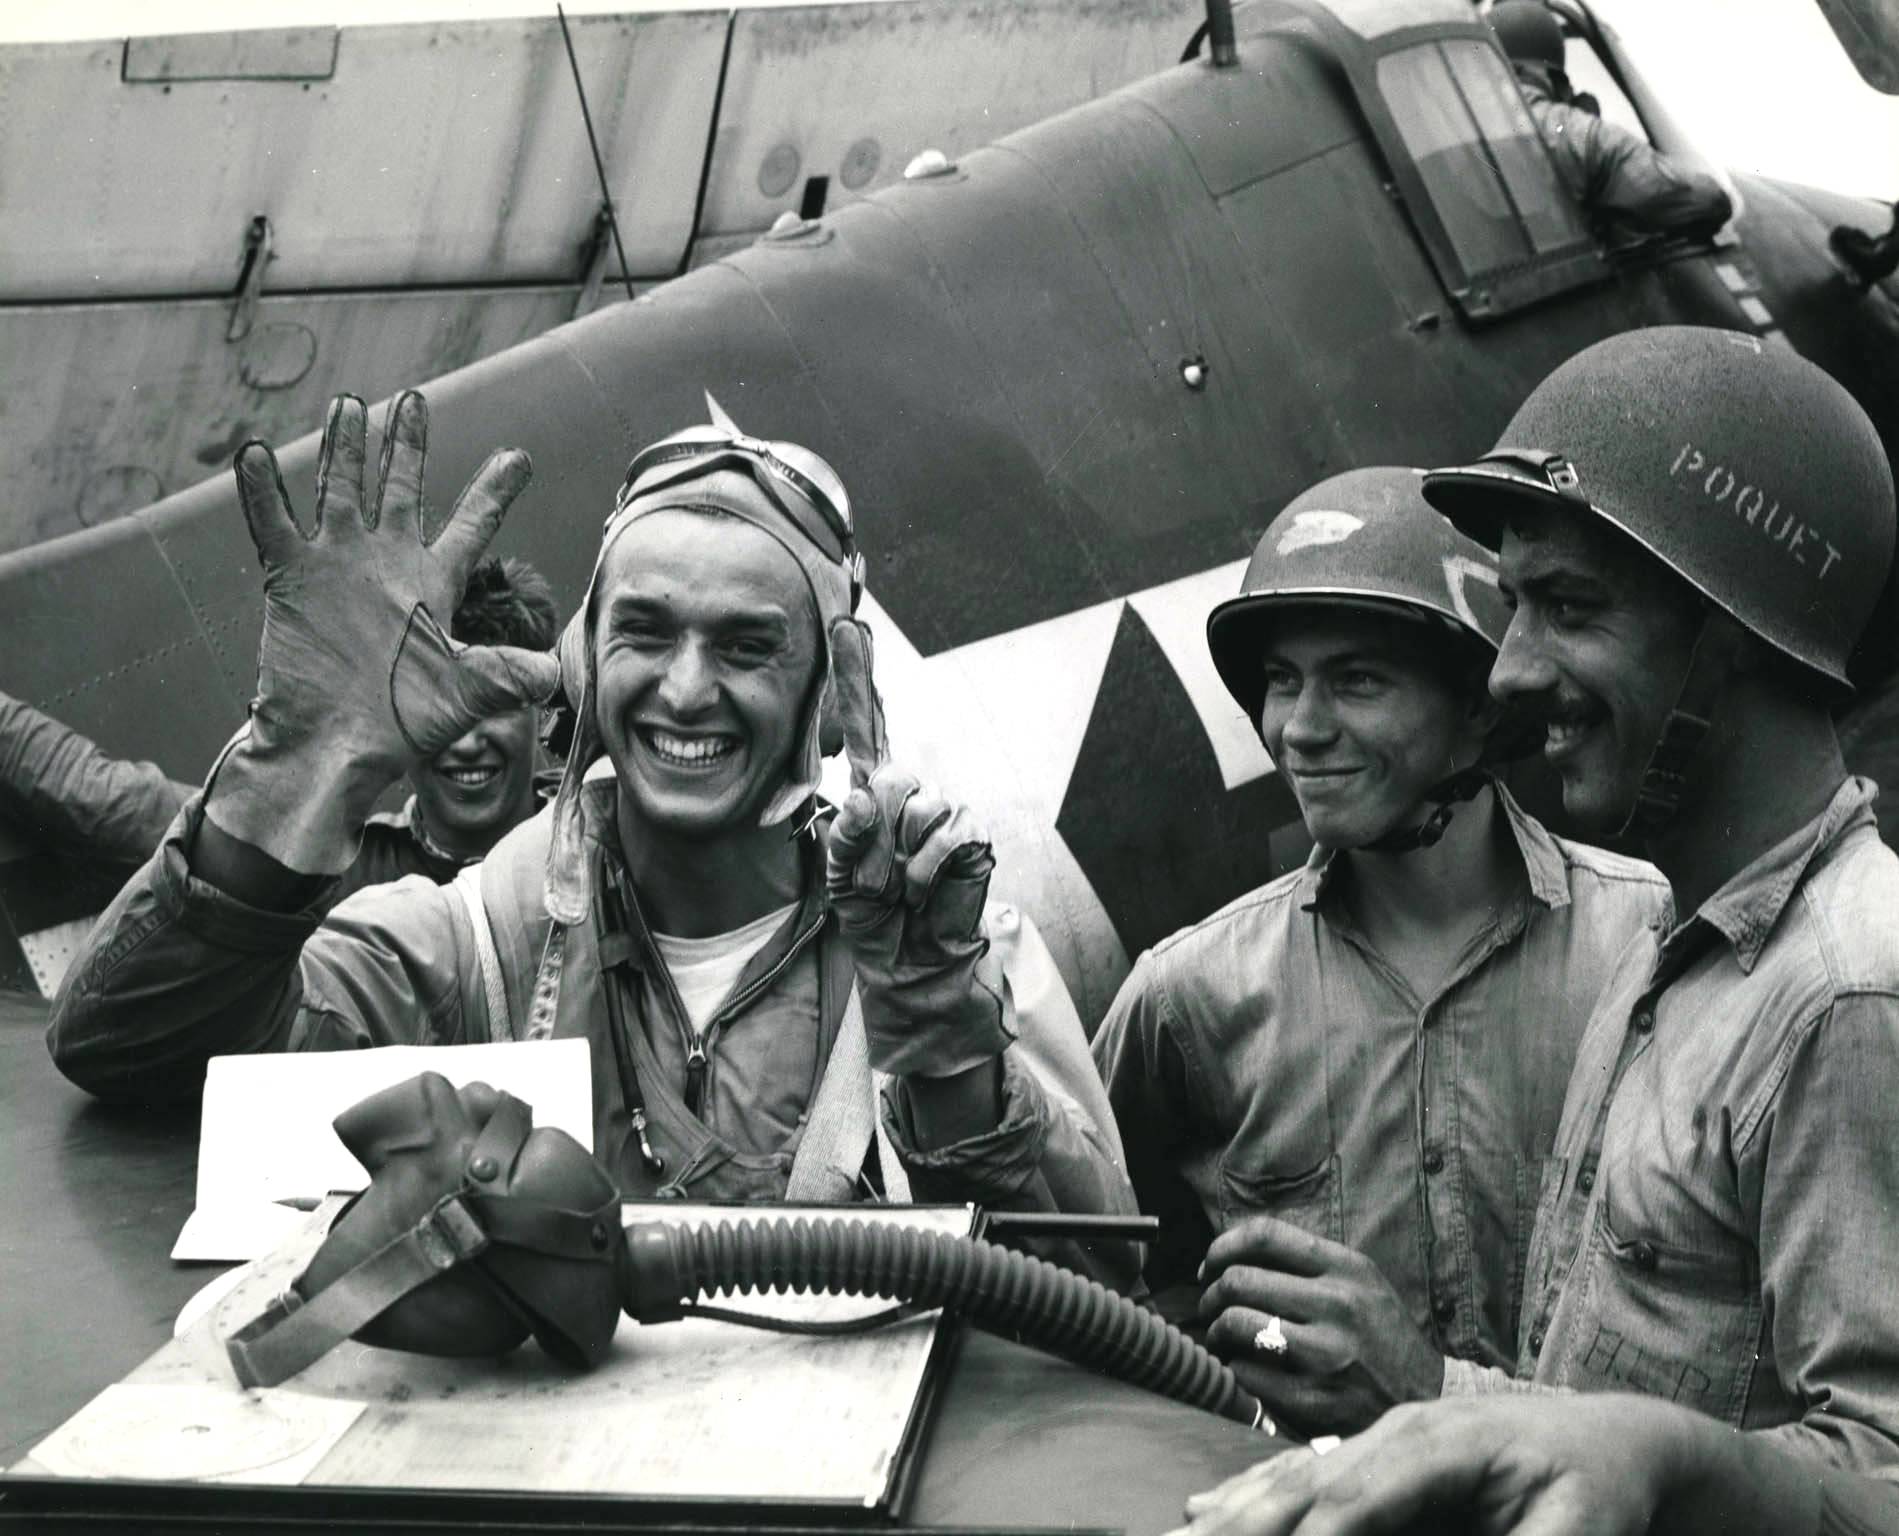 An elated fighter pilot, Alexander Vraciu, showing how many enemy planes he just shot down, his share in the Marianas Turkey Shoot. Fighting Squadron VF-16 aboard USS Lexington (Essex-class), 19 Jun 1944